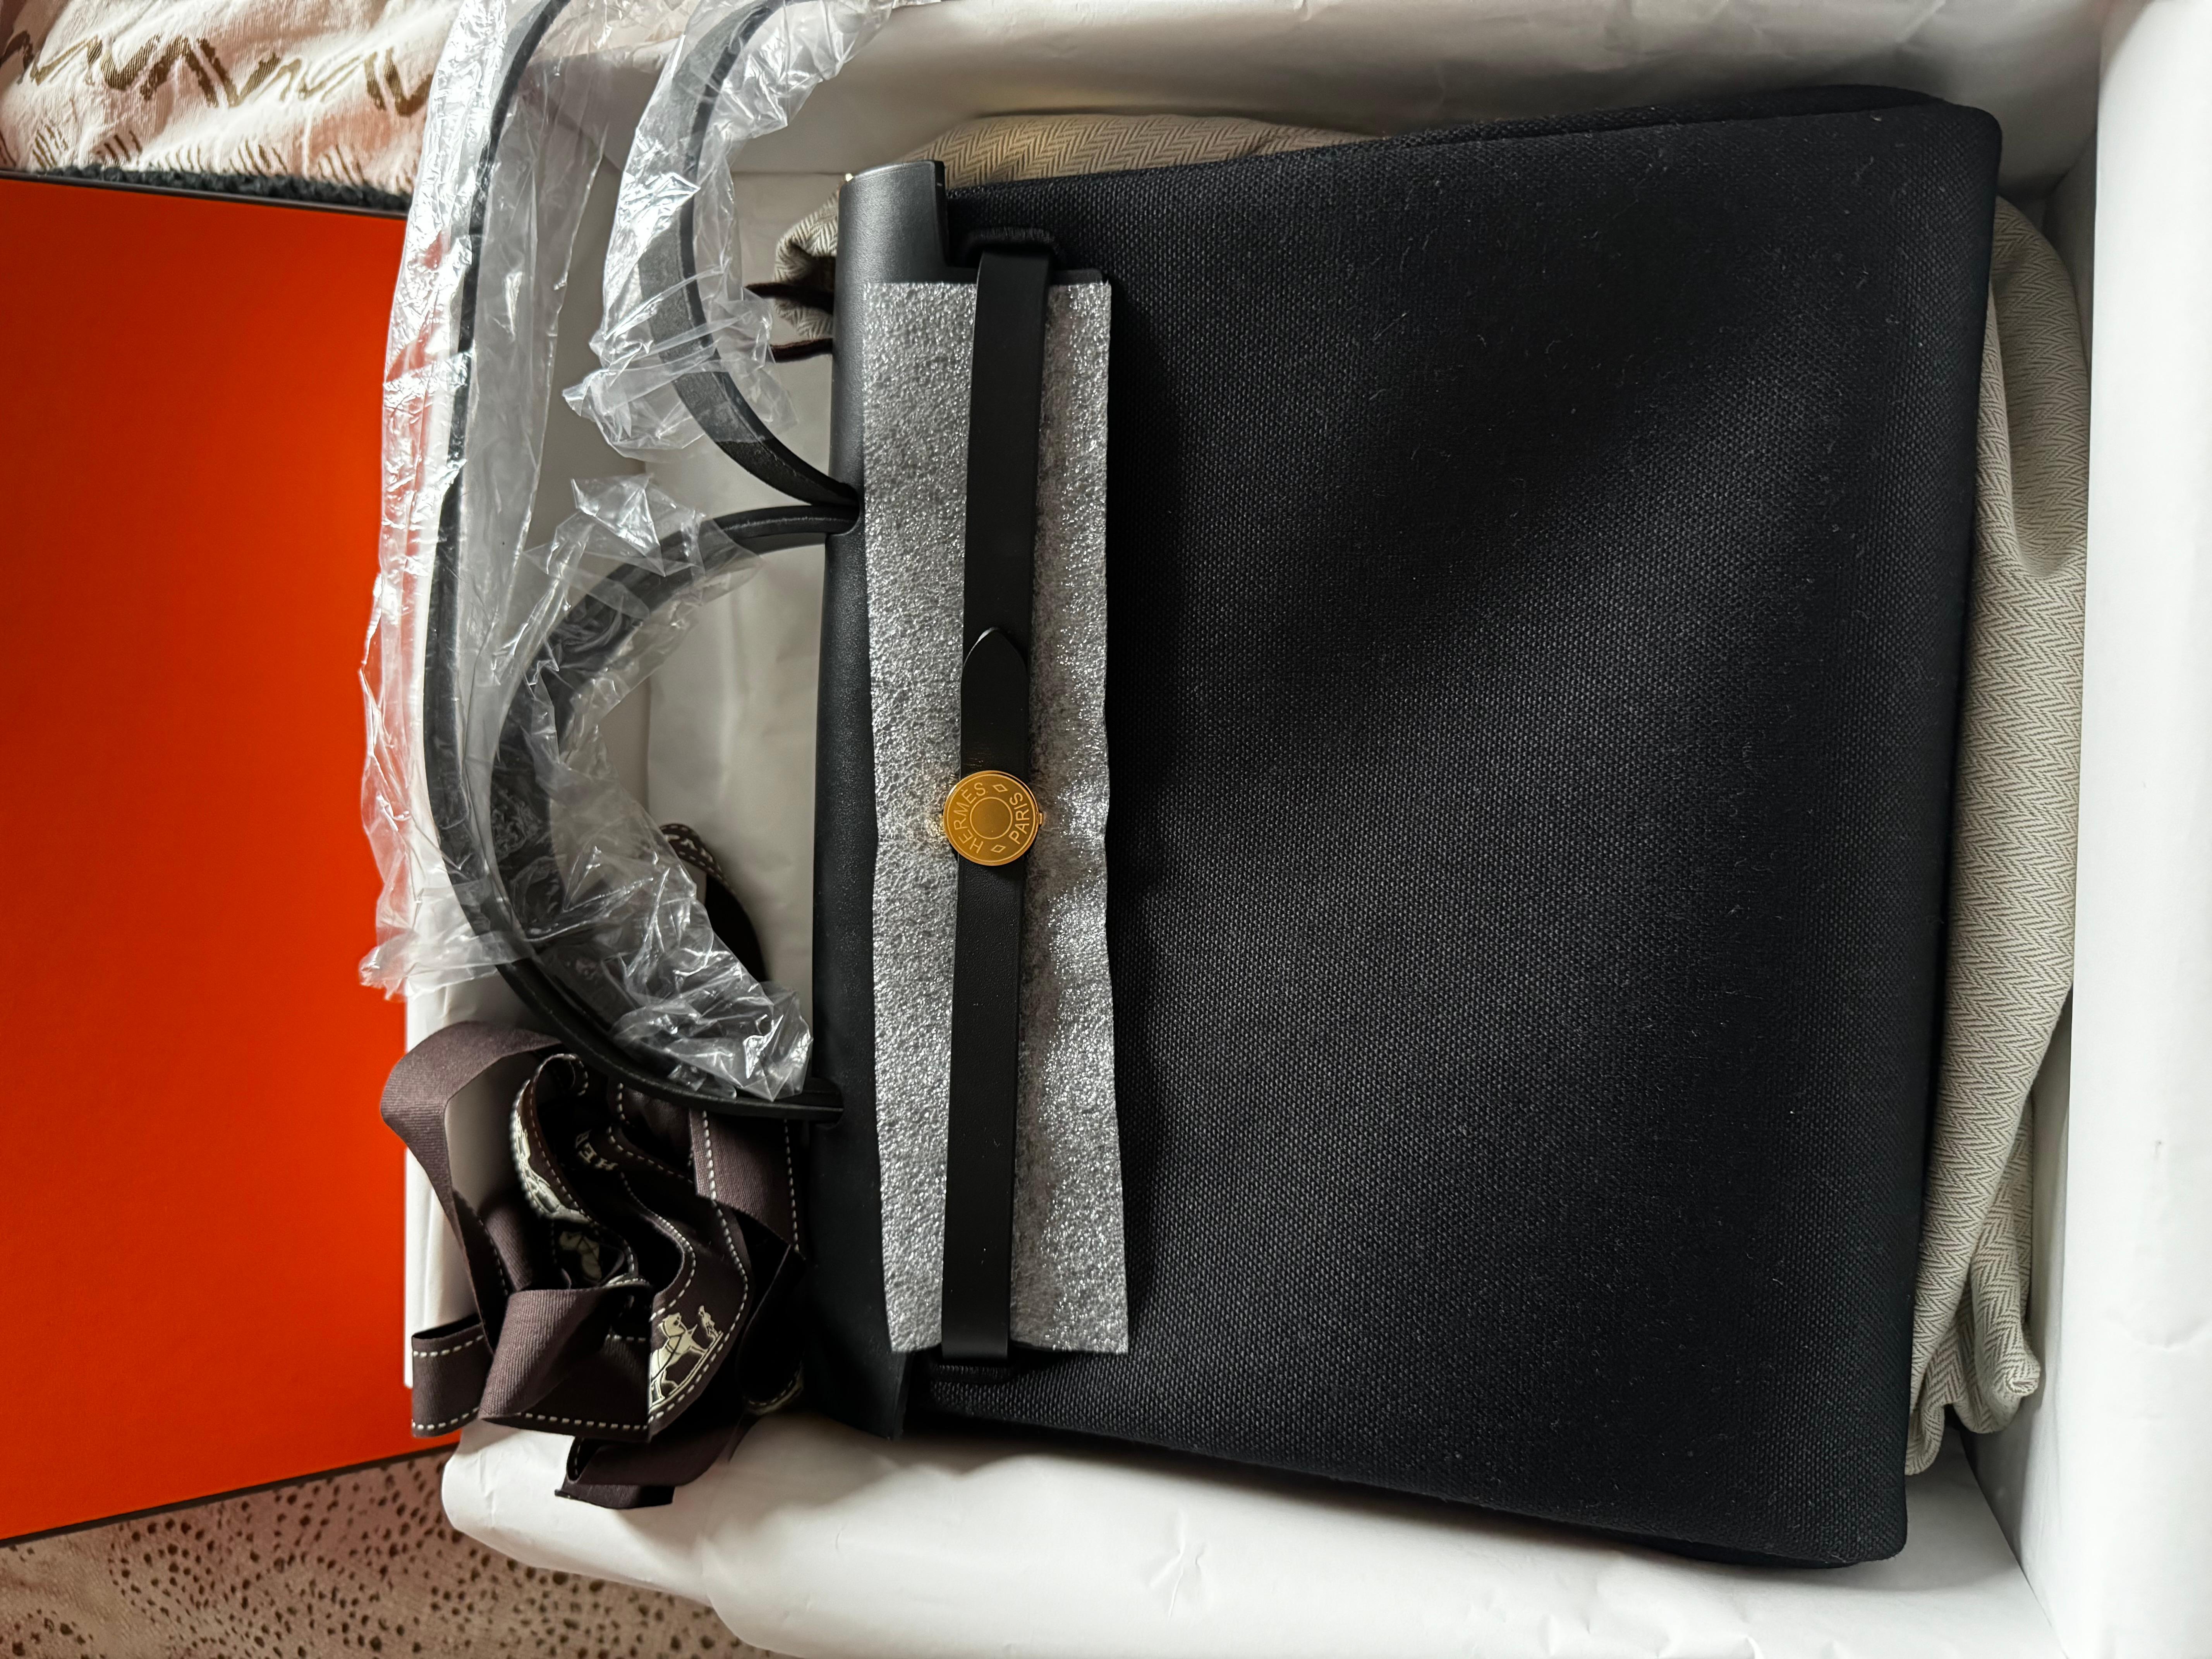 Hermes Herbag 31 Black gold hardware bag In New Condition For Sale In London, England